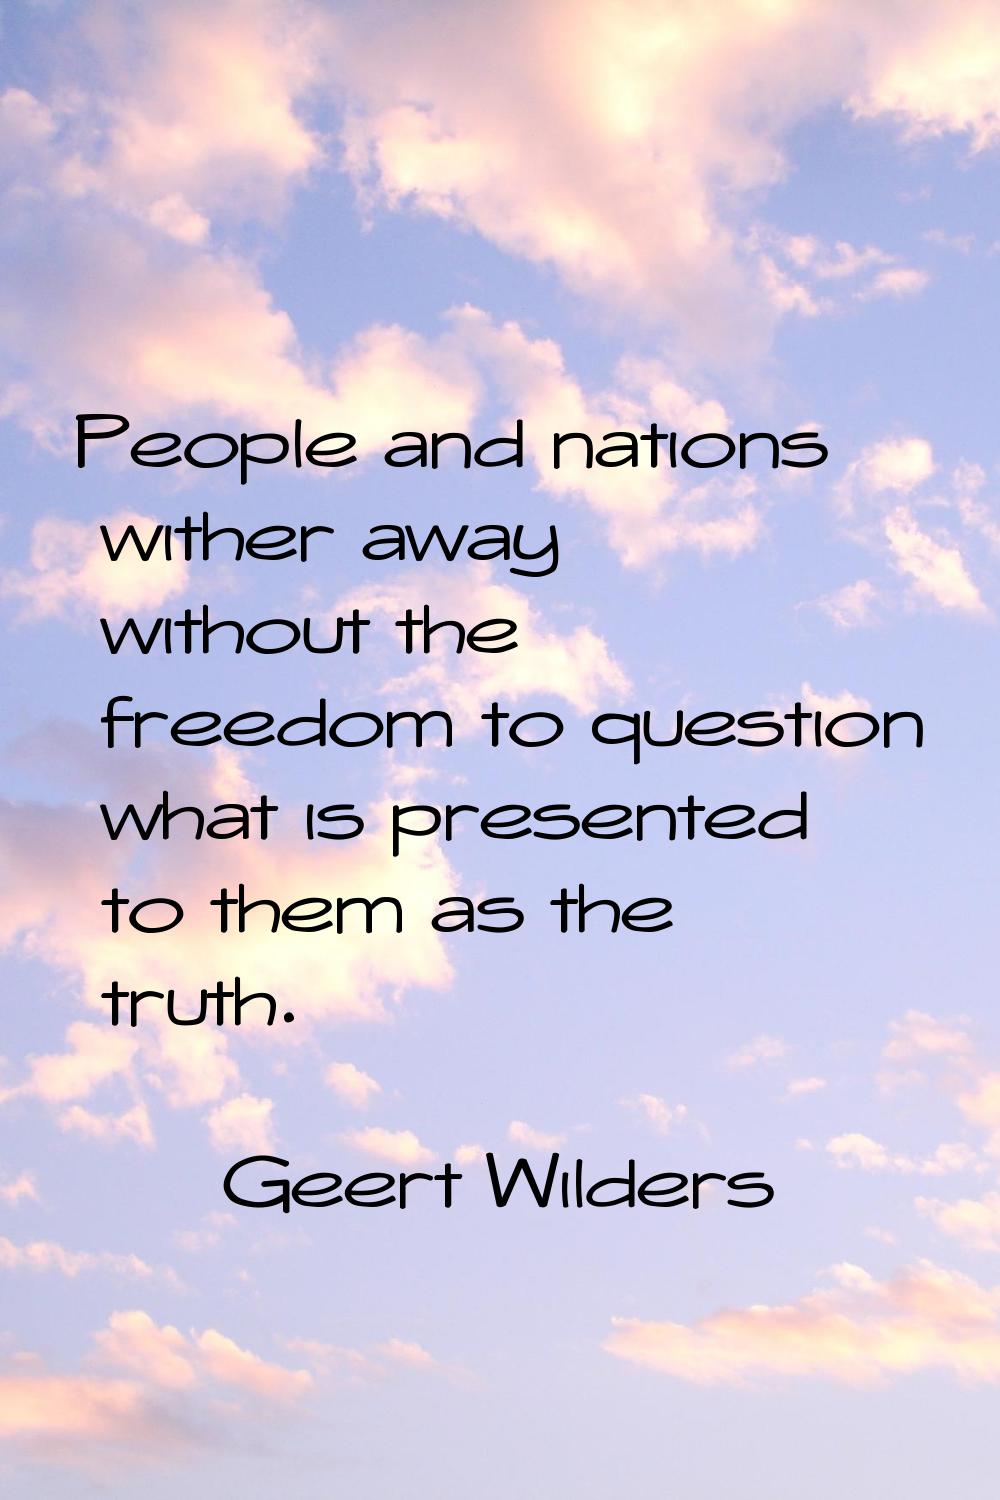 People and nations wither away without the freedom to question what is presented to them as the tru